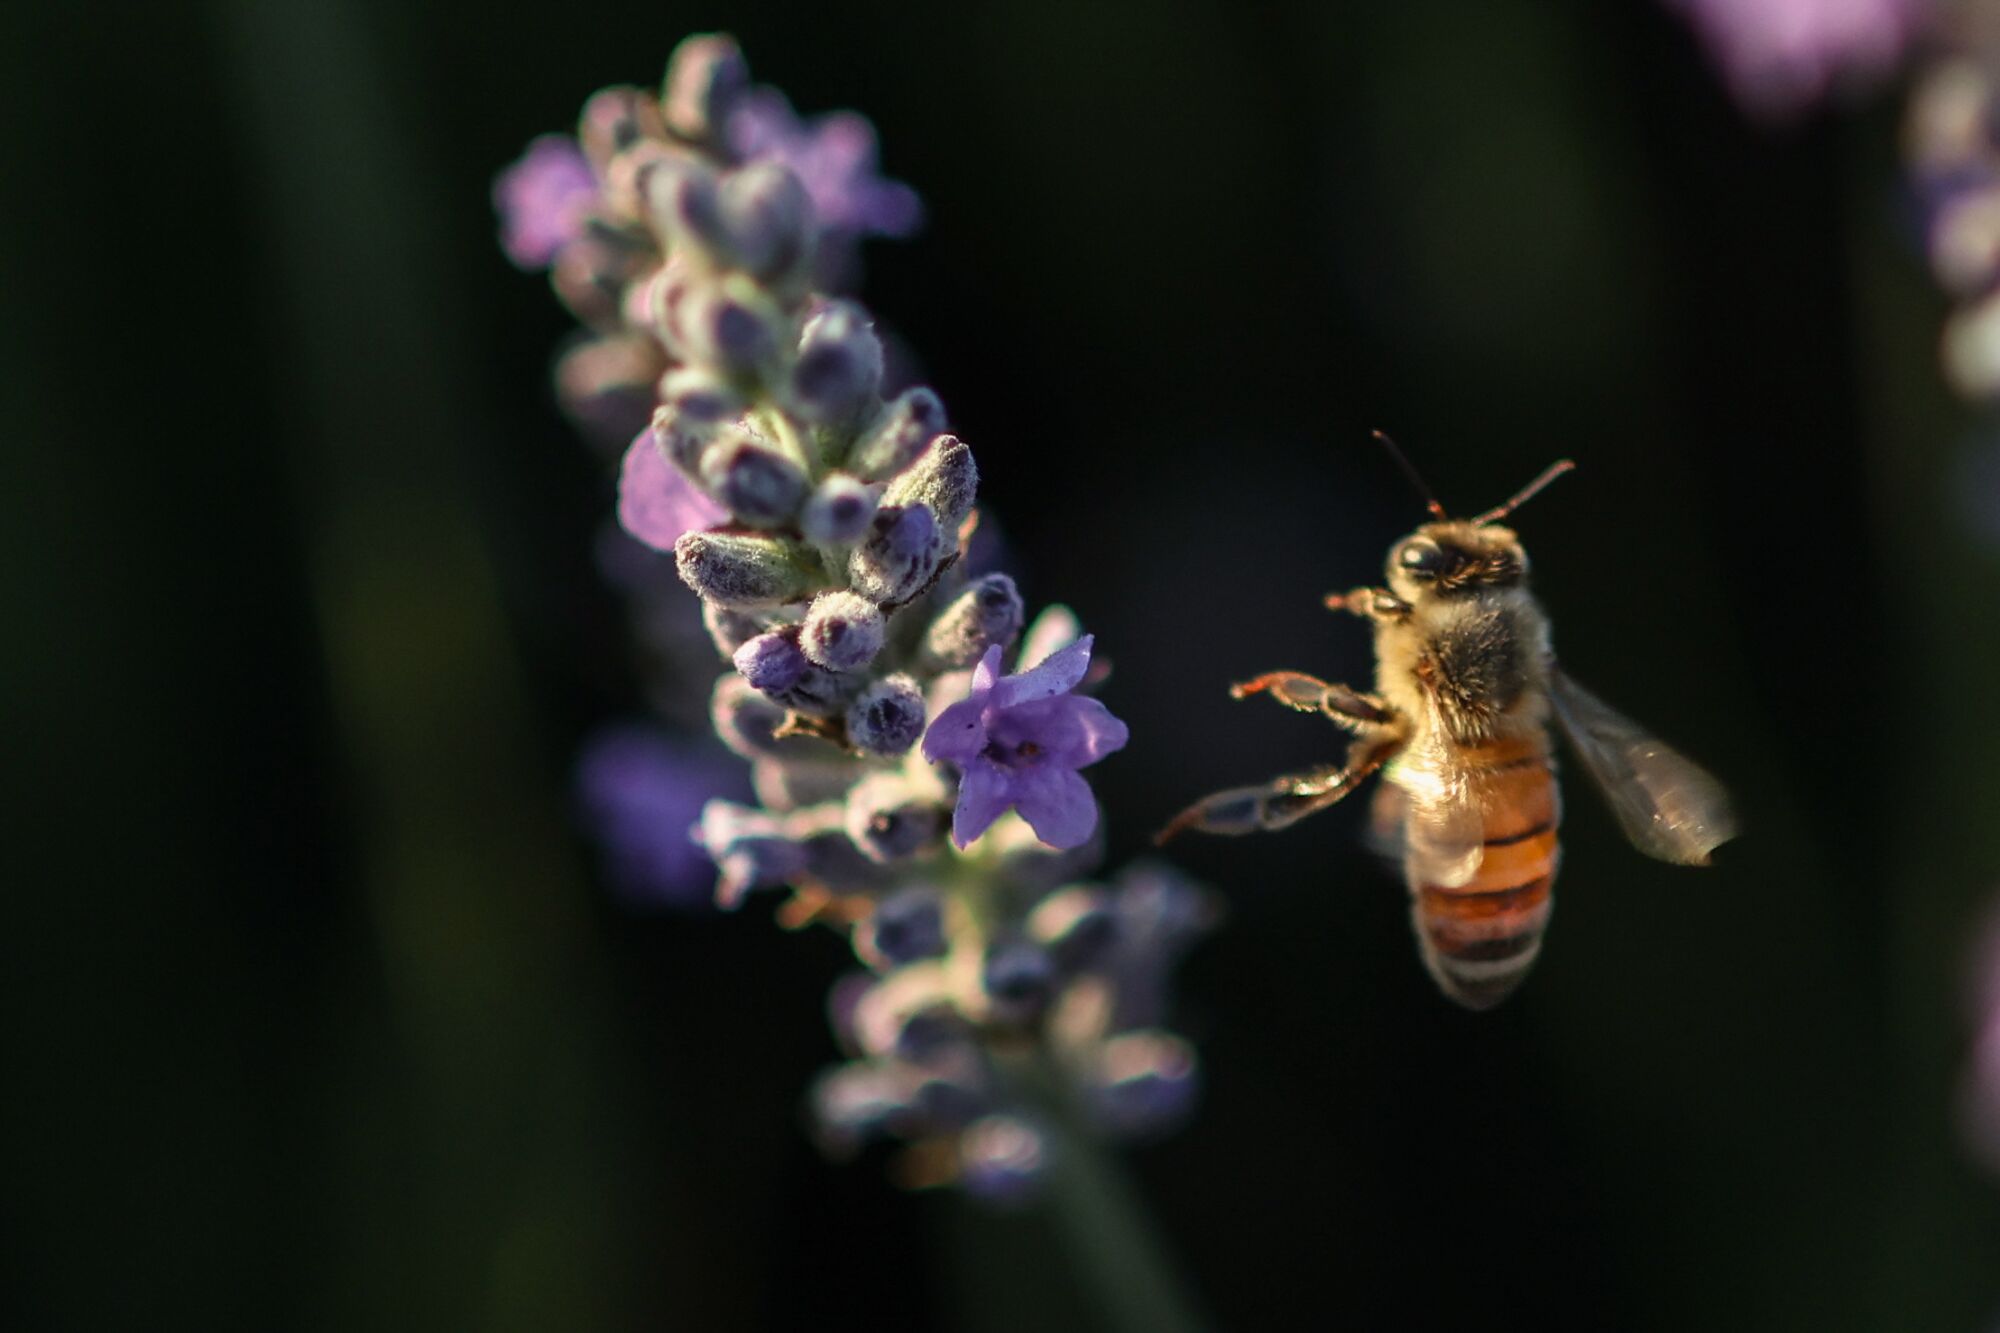 A bee flying close to a lavender flower.